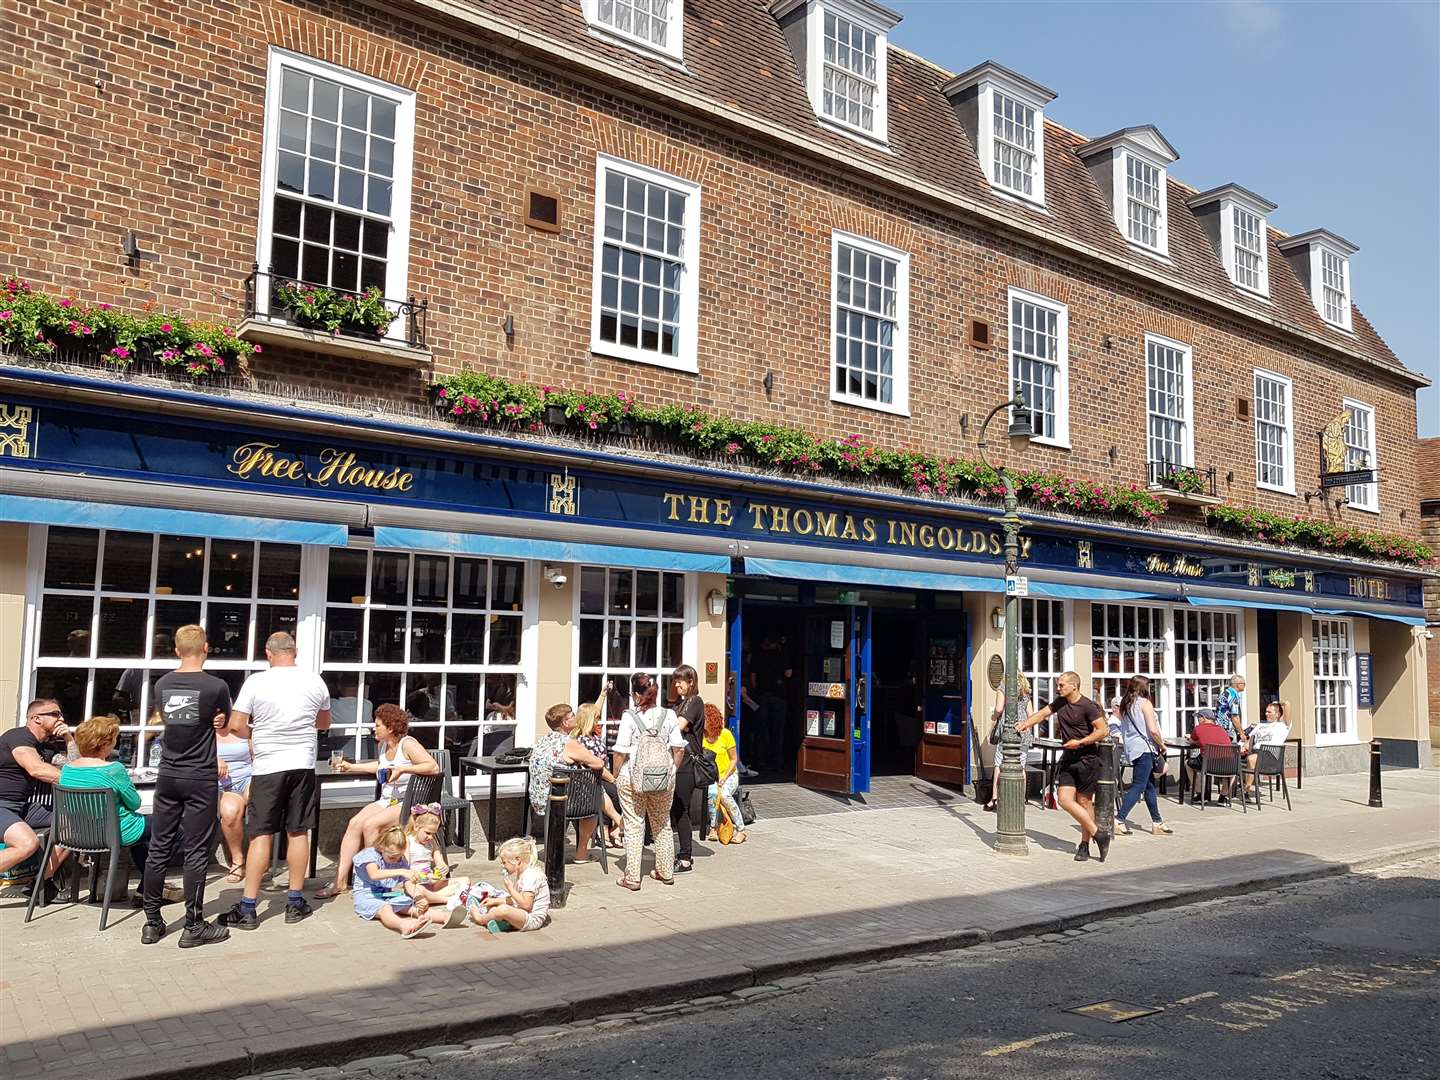 The Thomas Ingoldsby Wetherspoon pub in Canterbury